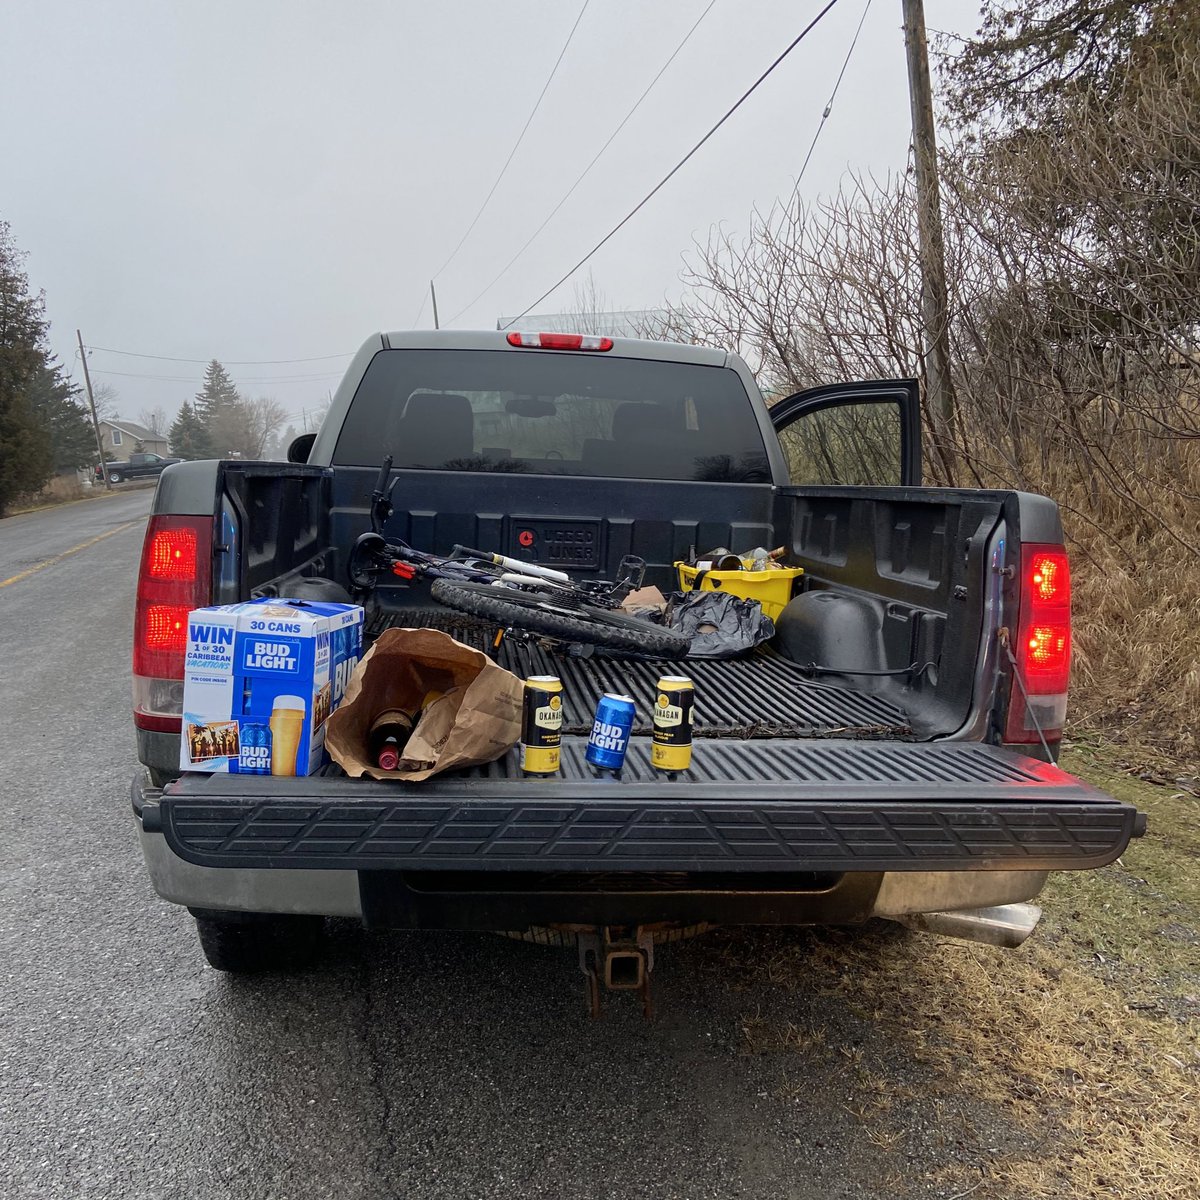 LeedsOPP officers stopped this vehicle for speeding on Howe Island Drive, HoweIsland. Tickets issued for driving 104km/hr in a posted 60km/hr zone and open liquor. Driver registered a “warn” on the roadside screening device. 3 day DL suspension.